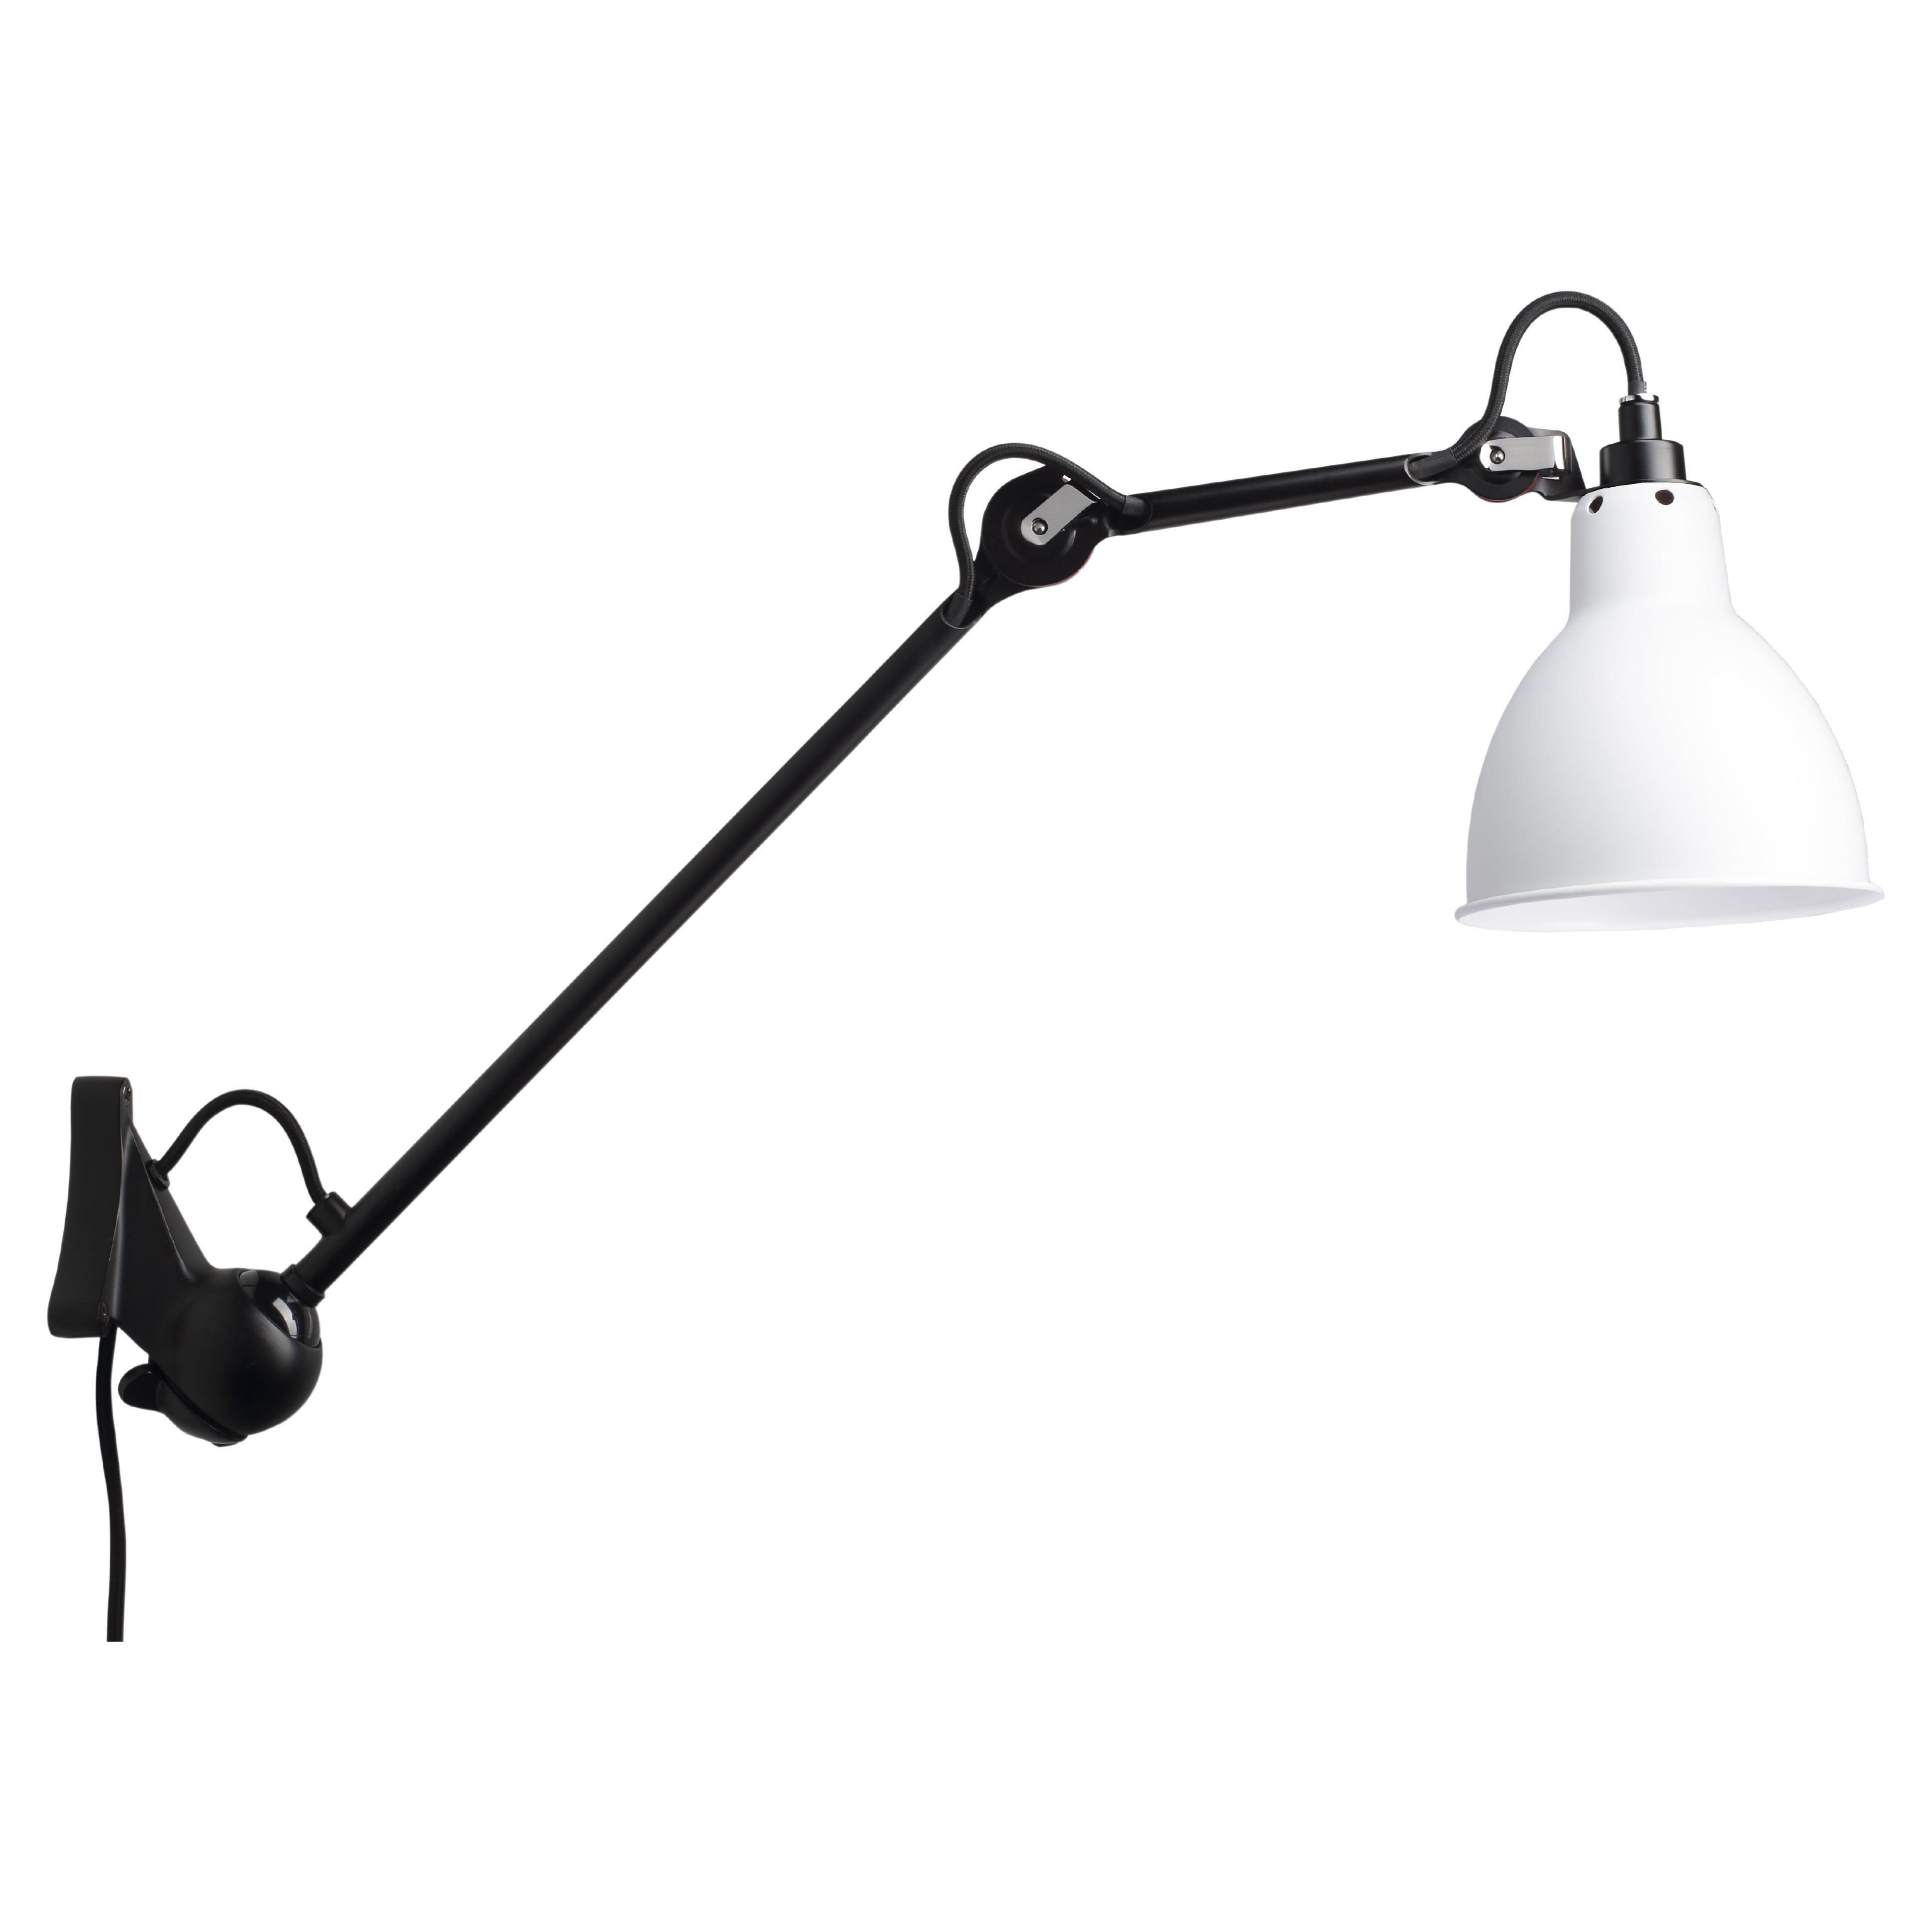 DCW Editions La Lampe Gras N°222 Wall Lamp in Black Arm and White Shade